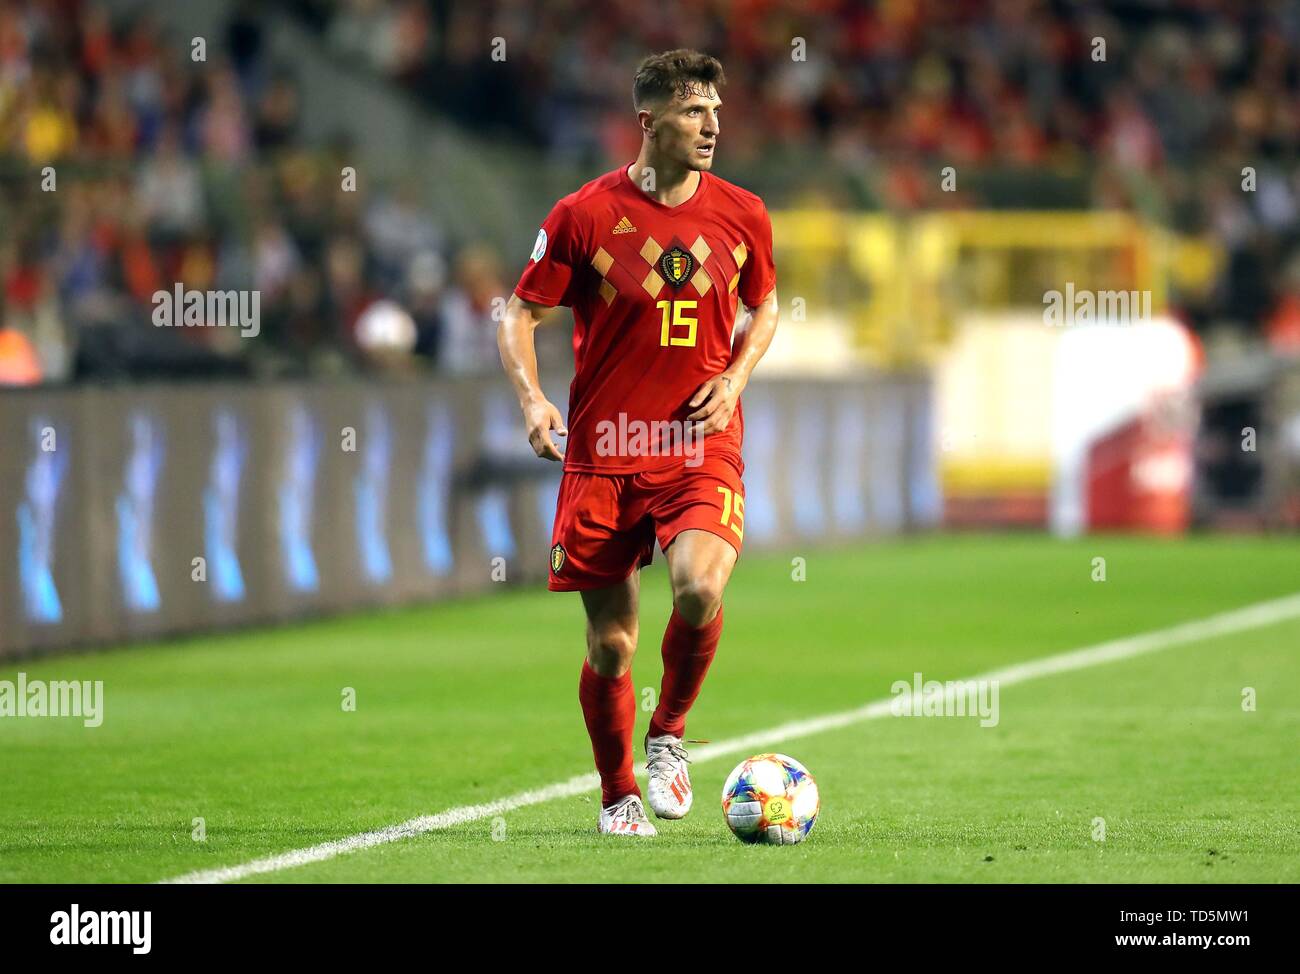 Belgium's Thomas Meunier in action during the UEFA Euro 2020 Qualifying, Group I match at the King Baudouin Stadium, Brussels. PRESS ASSOCIATION Photo. Picture date: Tuesday June 11, 2019. See PA story SOCCER Belgium. Photo credit should read: Bradley Collyer/PA Wire. Stock Photo